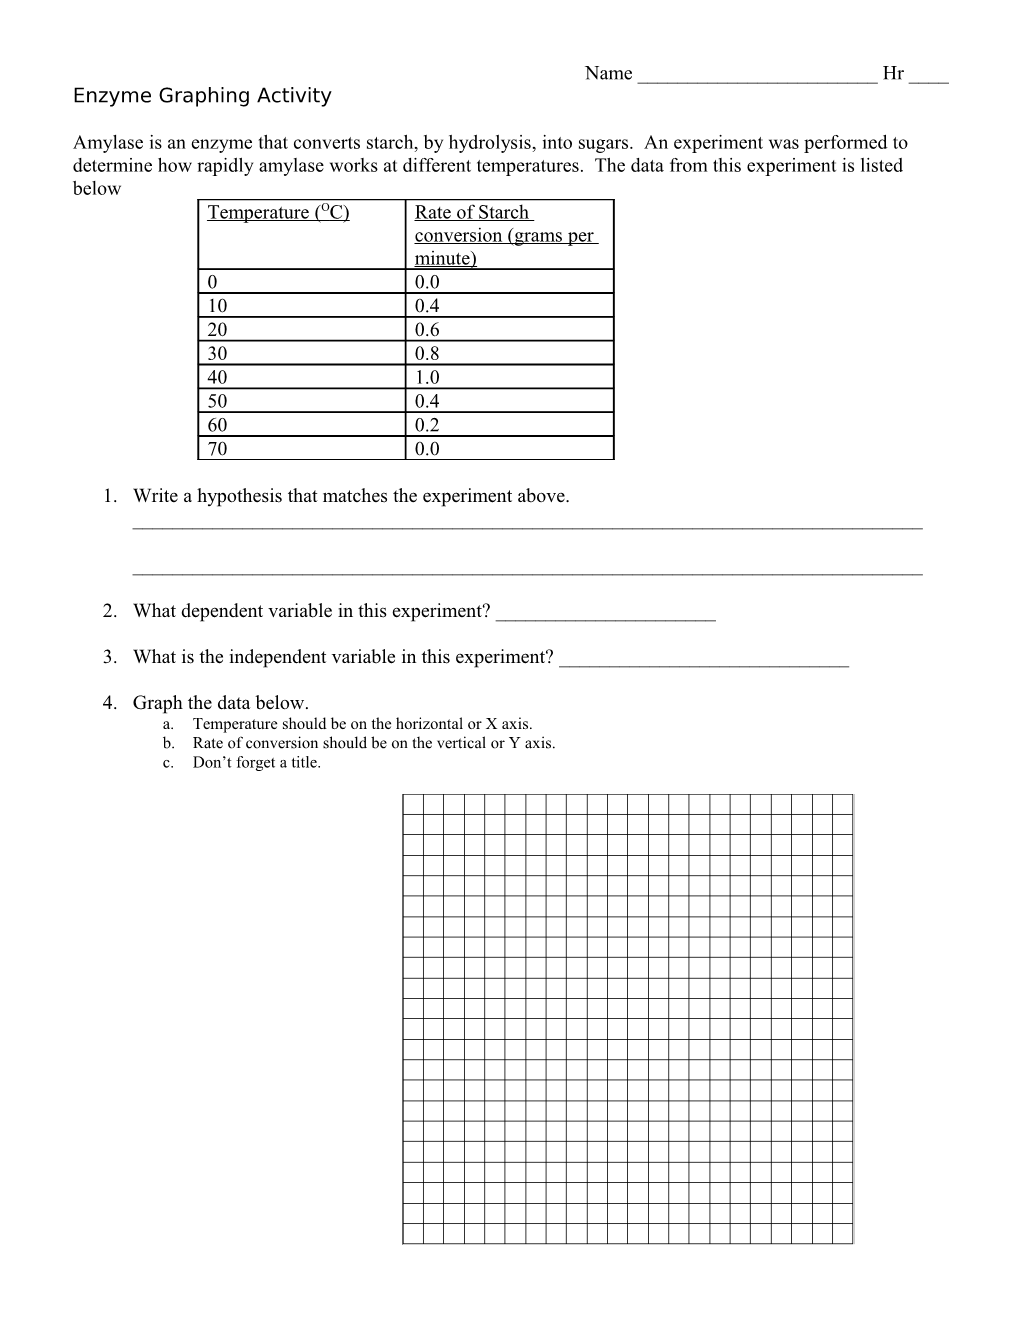 Enzyme Graphing Activity